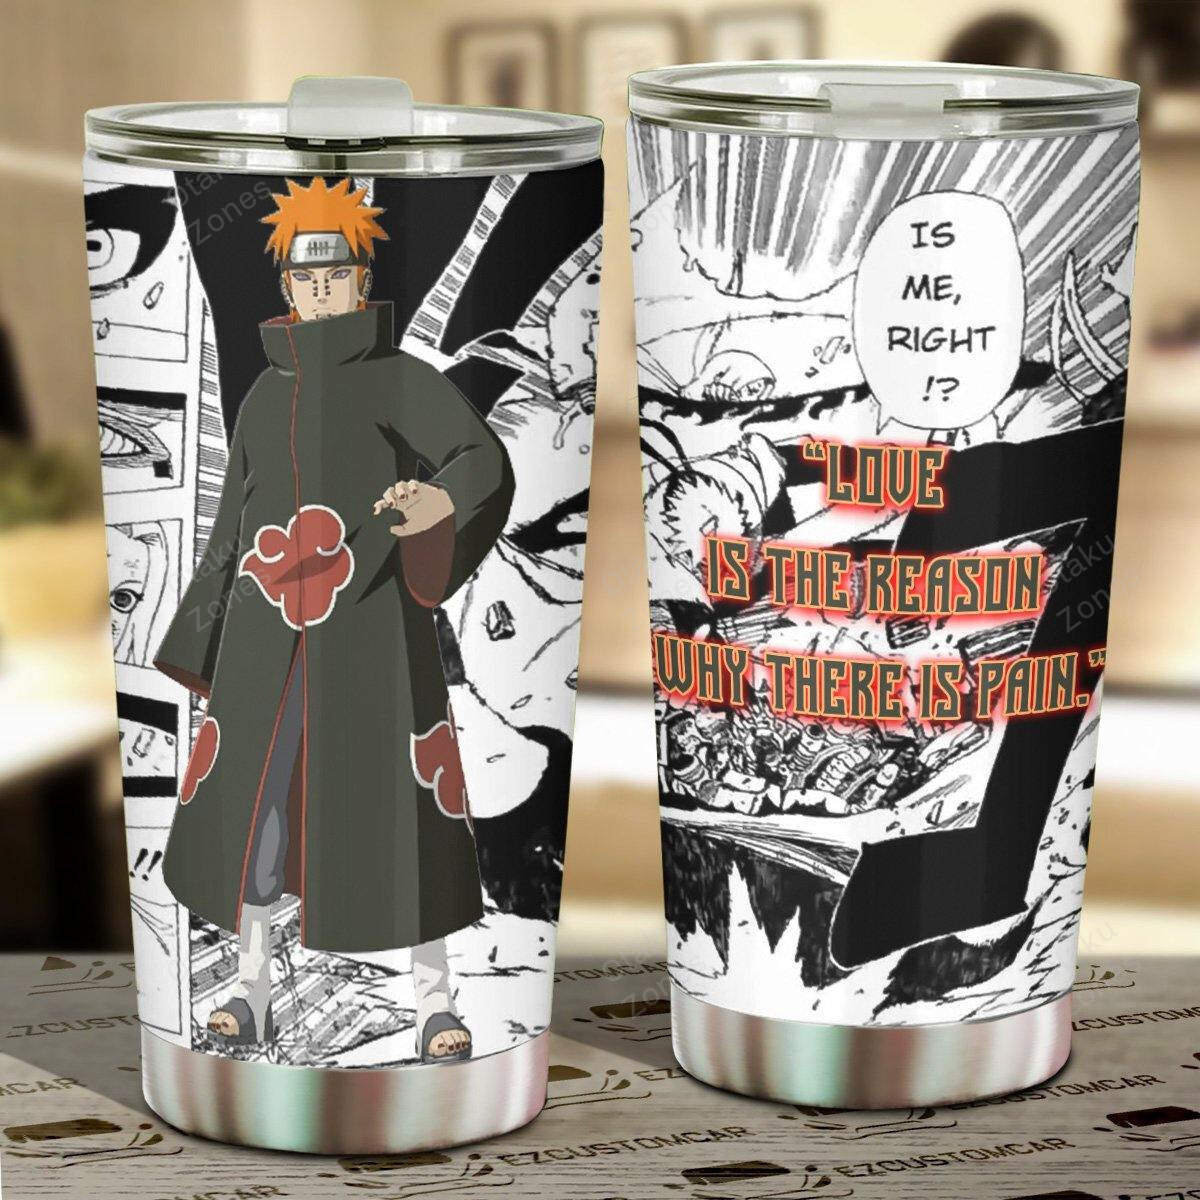 Go ahead and order your new tumbler now! 94